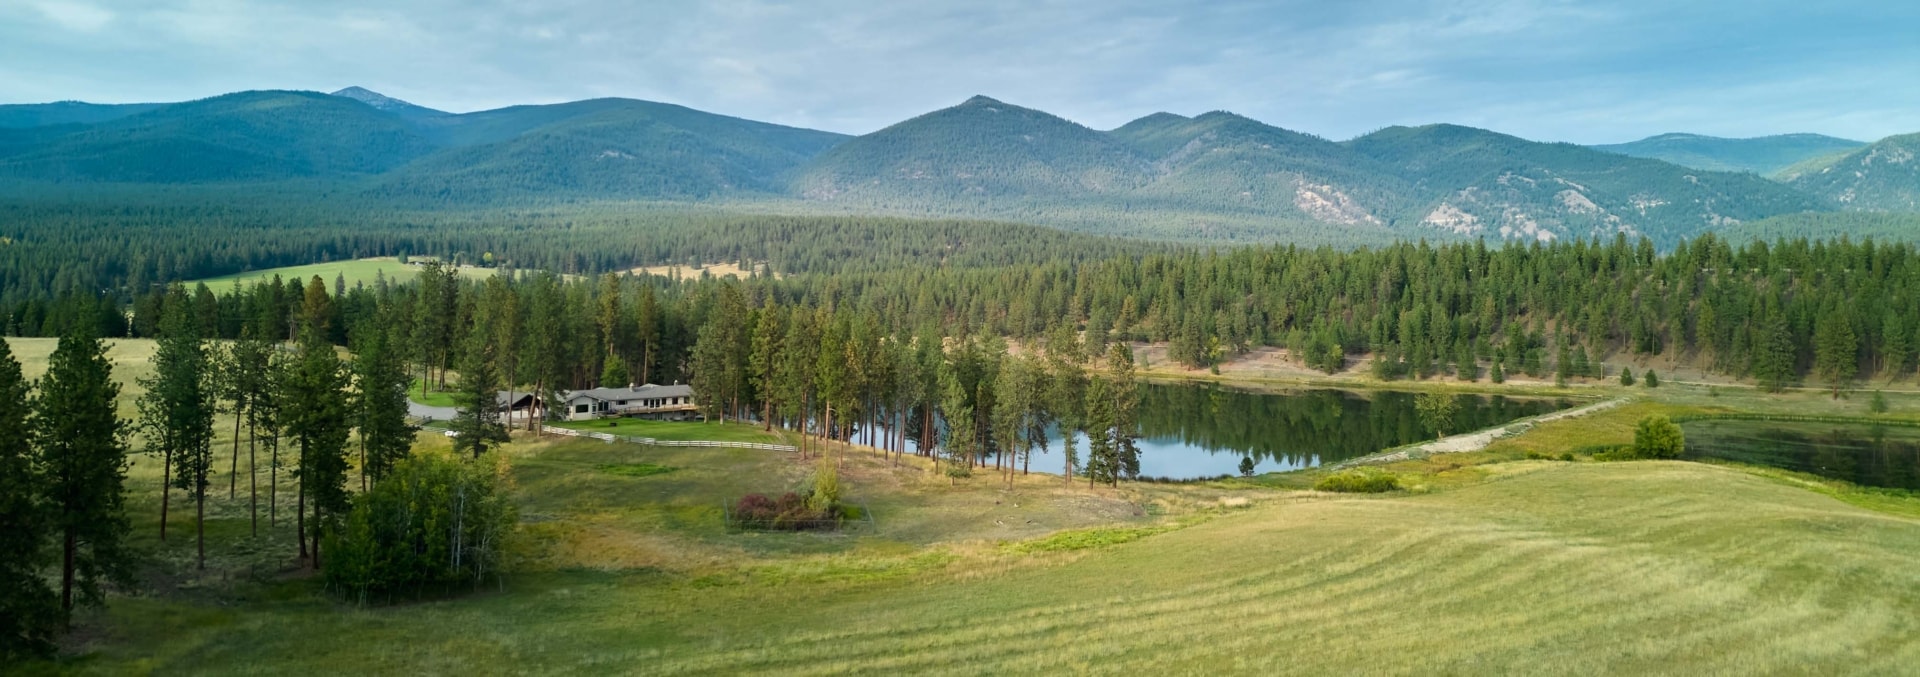 montana ranches for sale checkpoint ranch